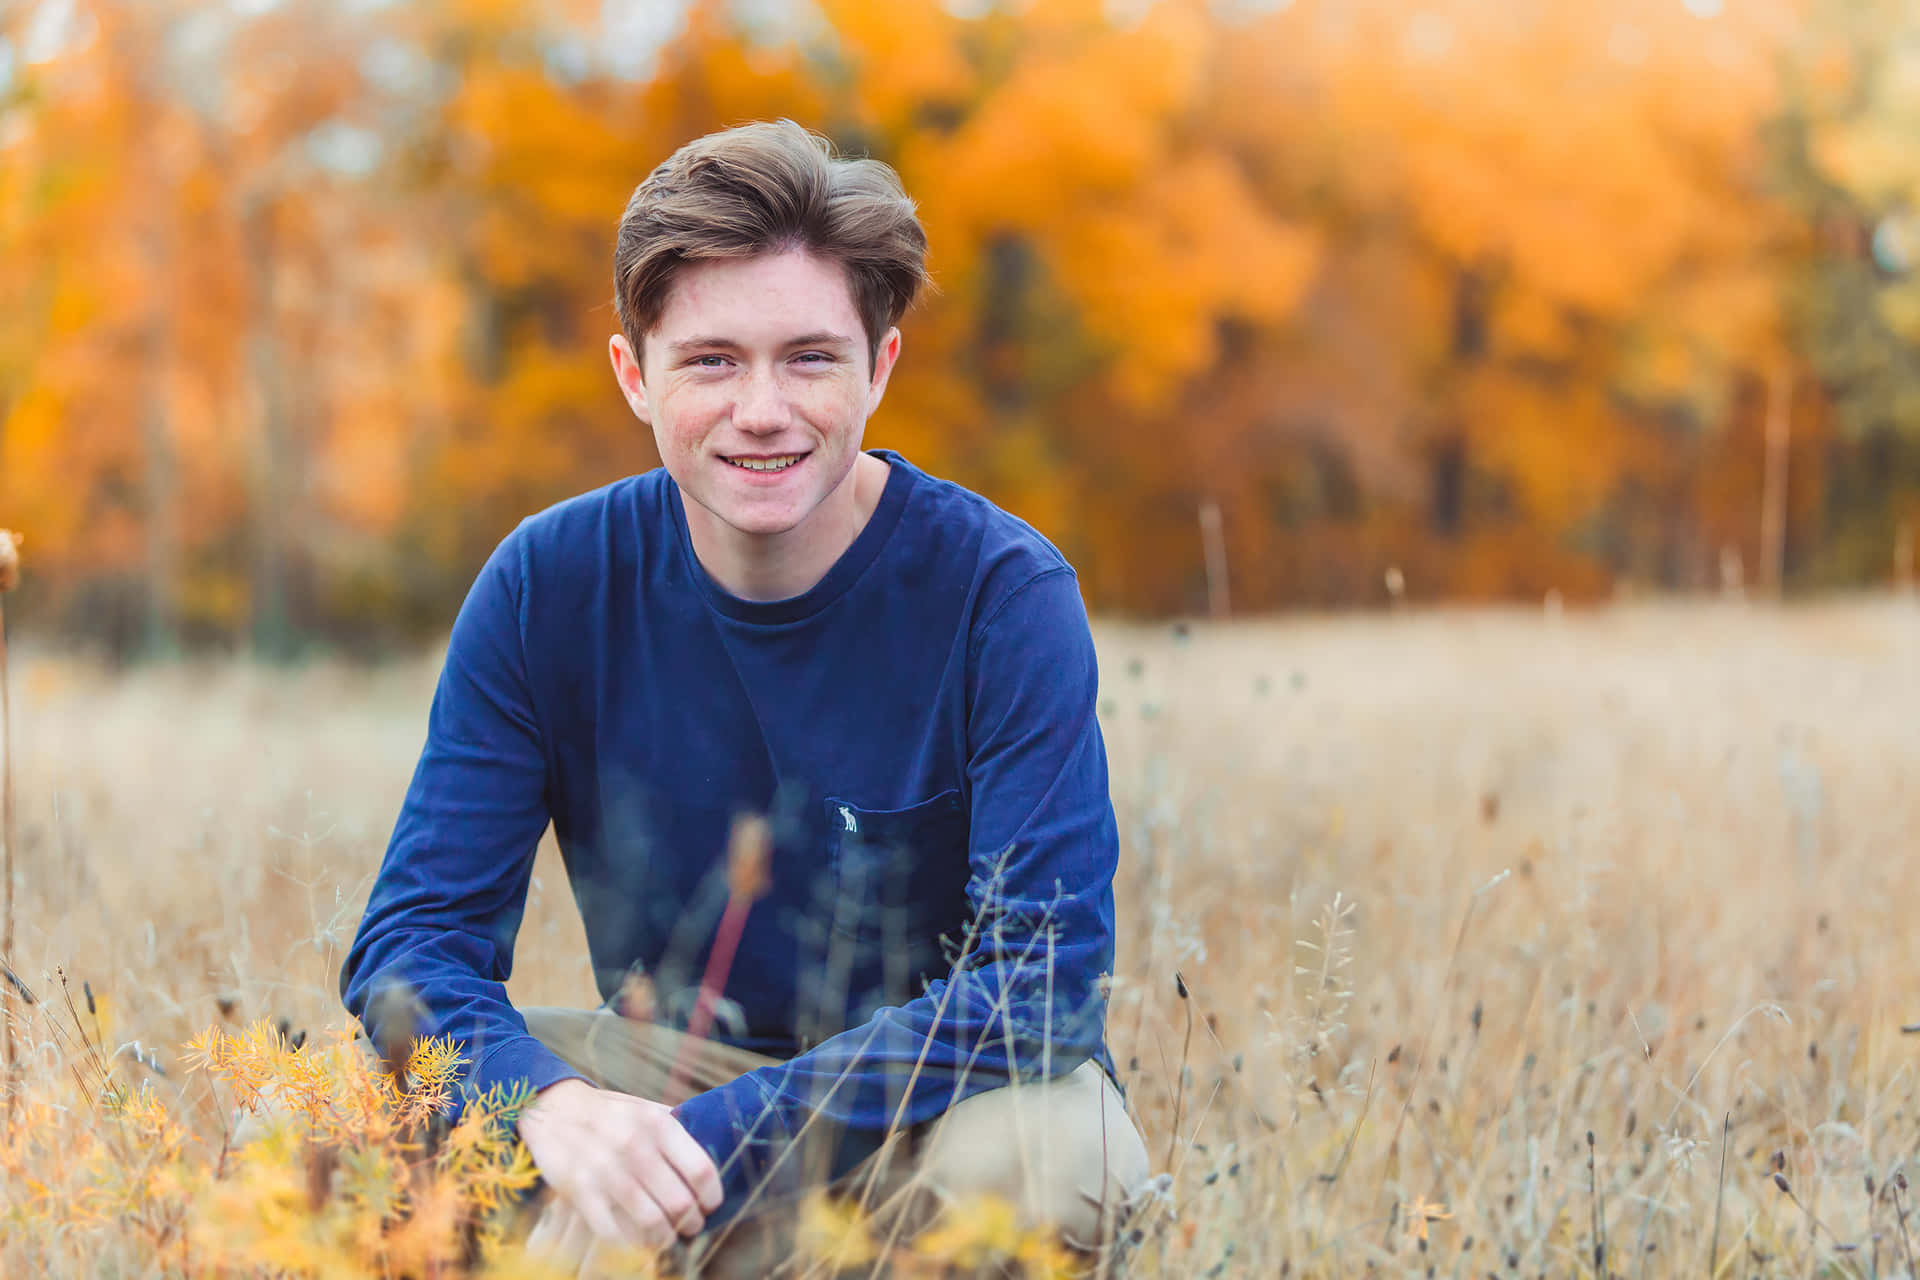 Soak in the beauty of a crisp Autumn day for your Senior pictures!